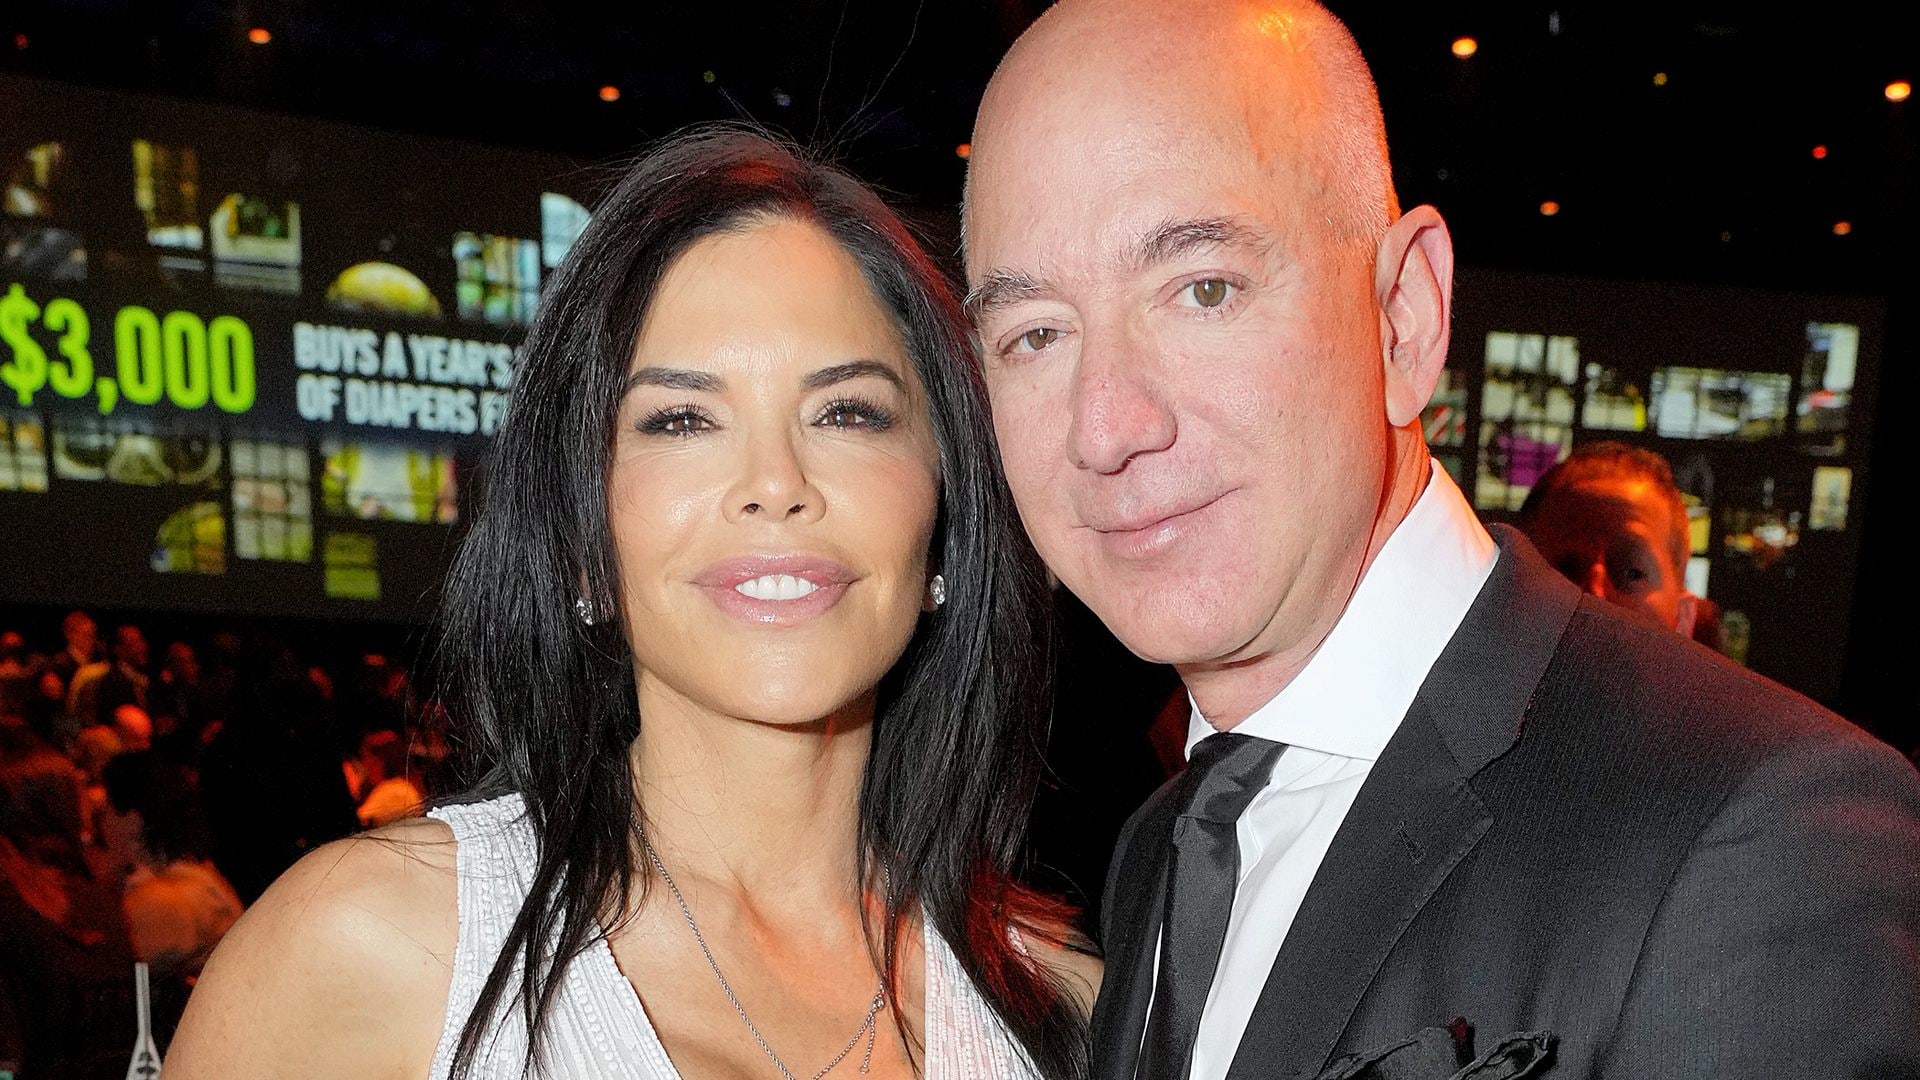 Lauren Sanchez in a white embellished dress with Jeff Bezos in a suit